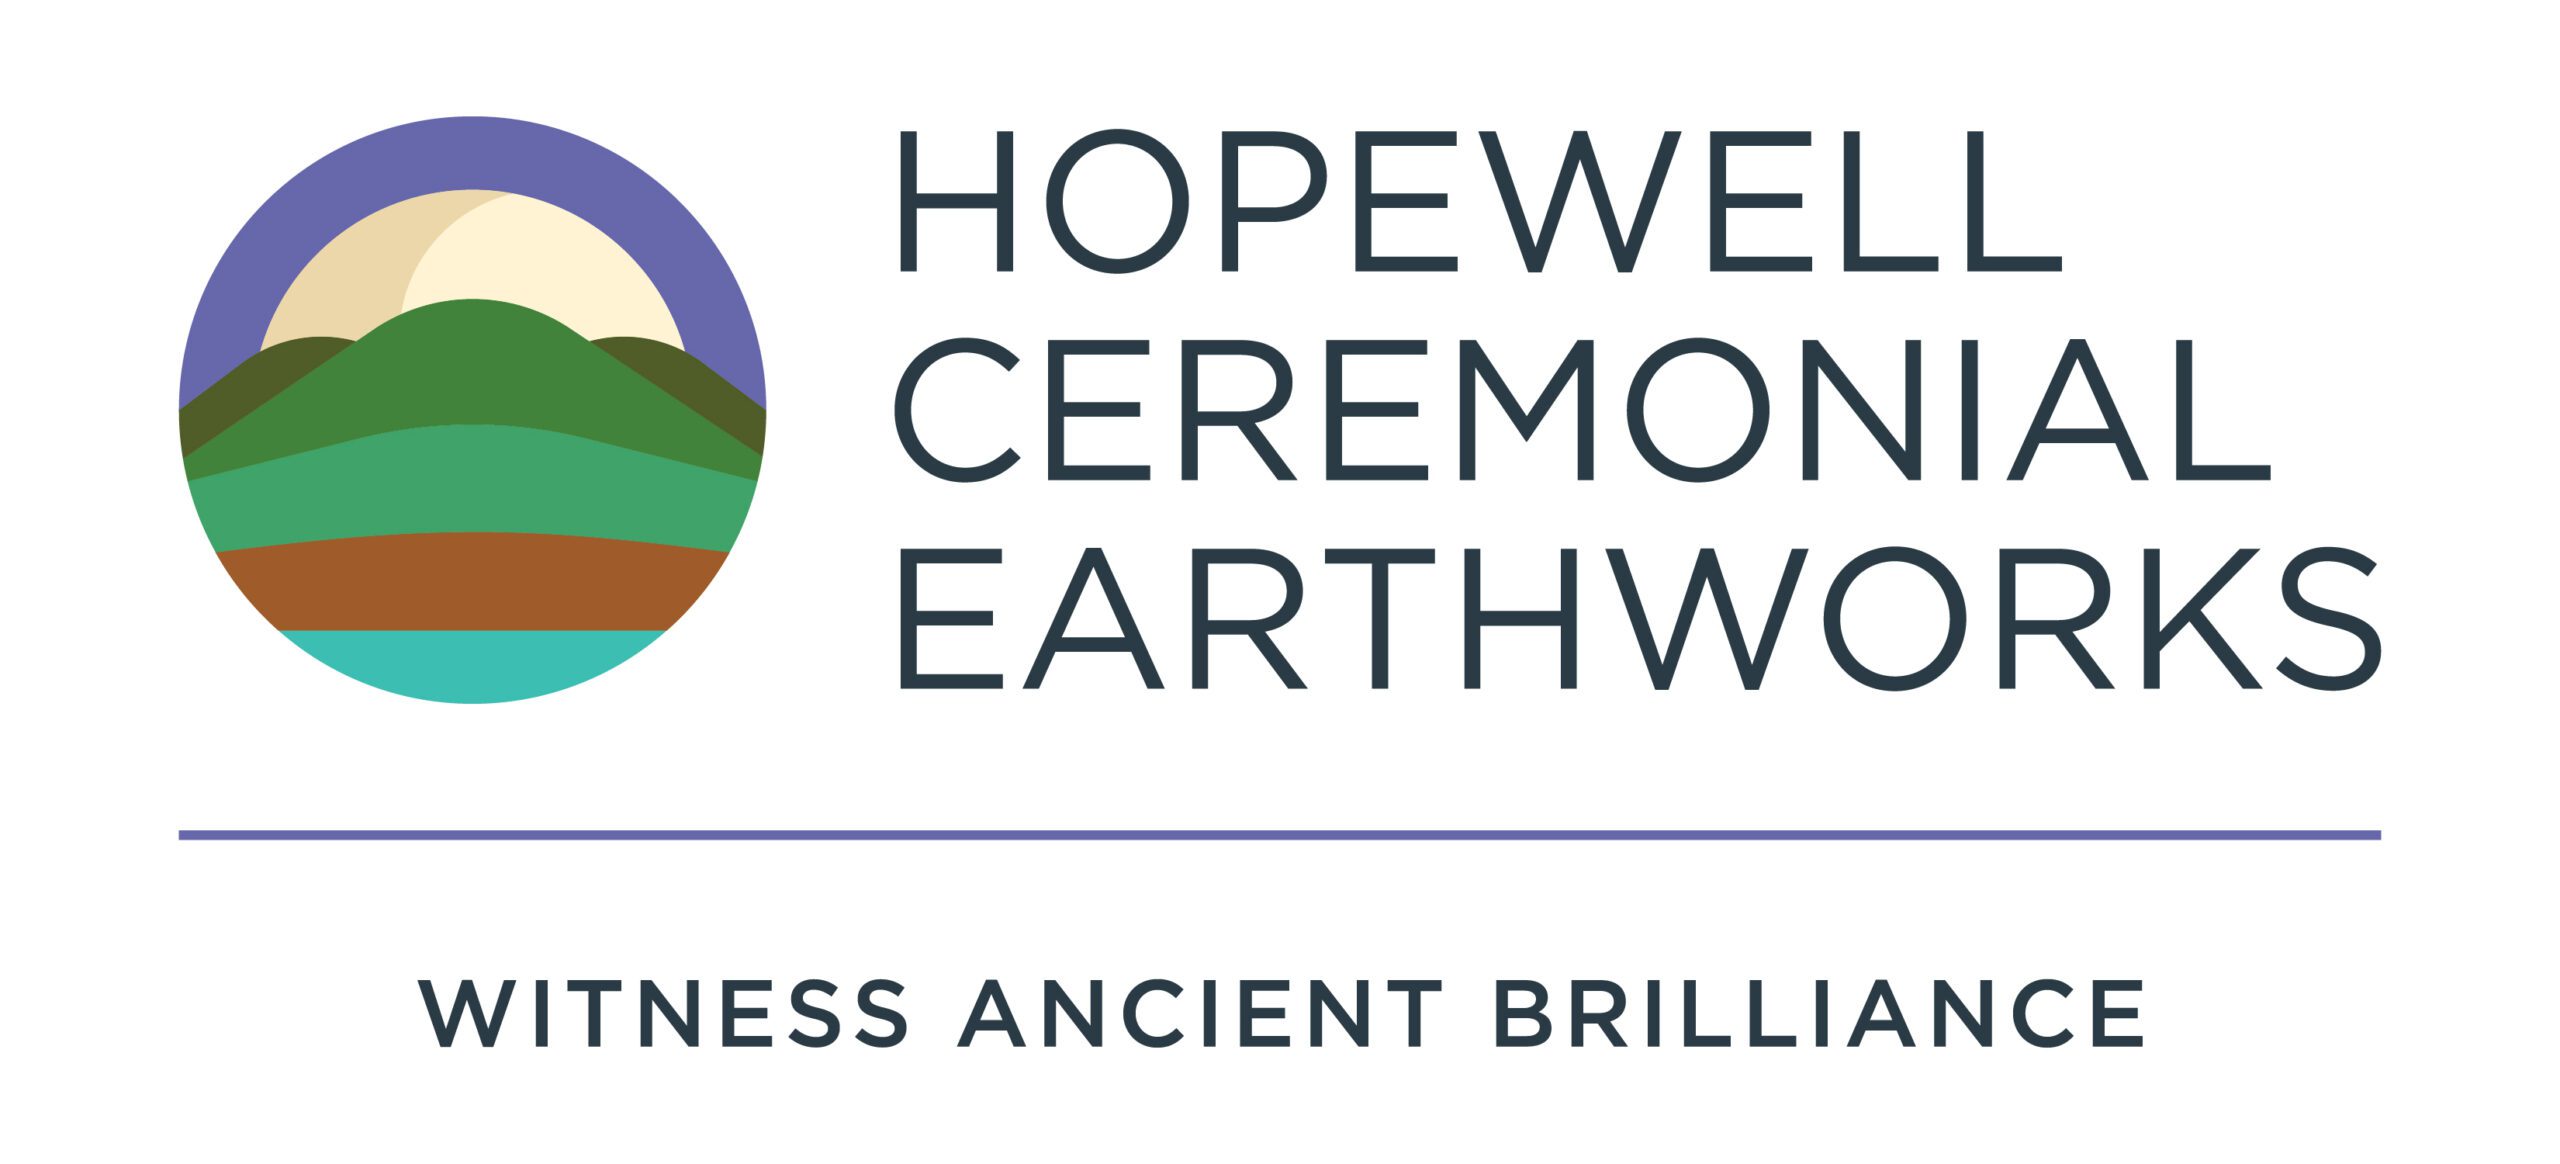 Hopewell Ceremonial Earthworks Witness Ancient Brilliance